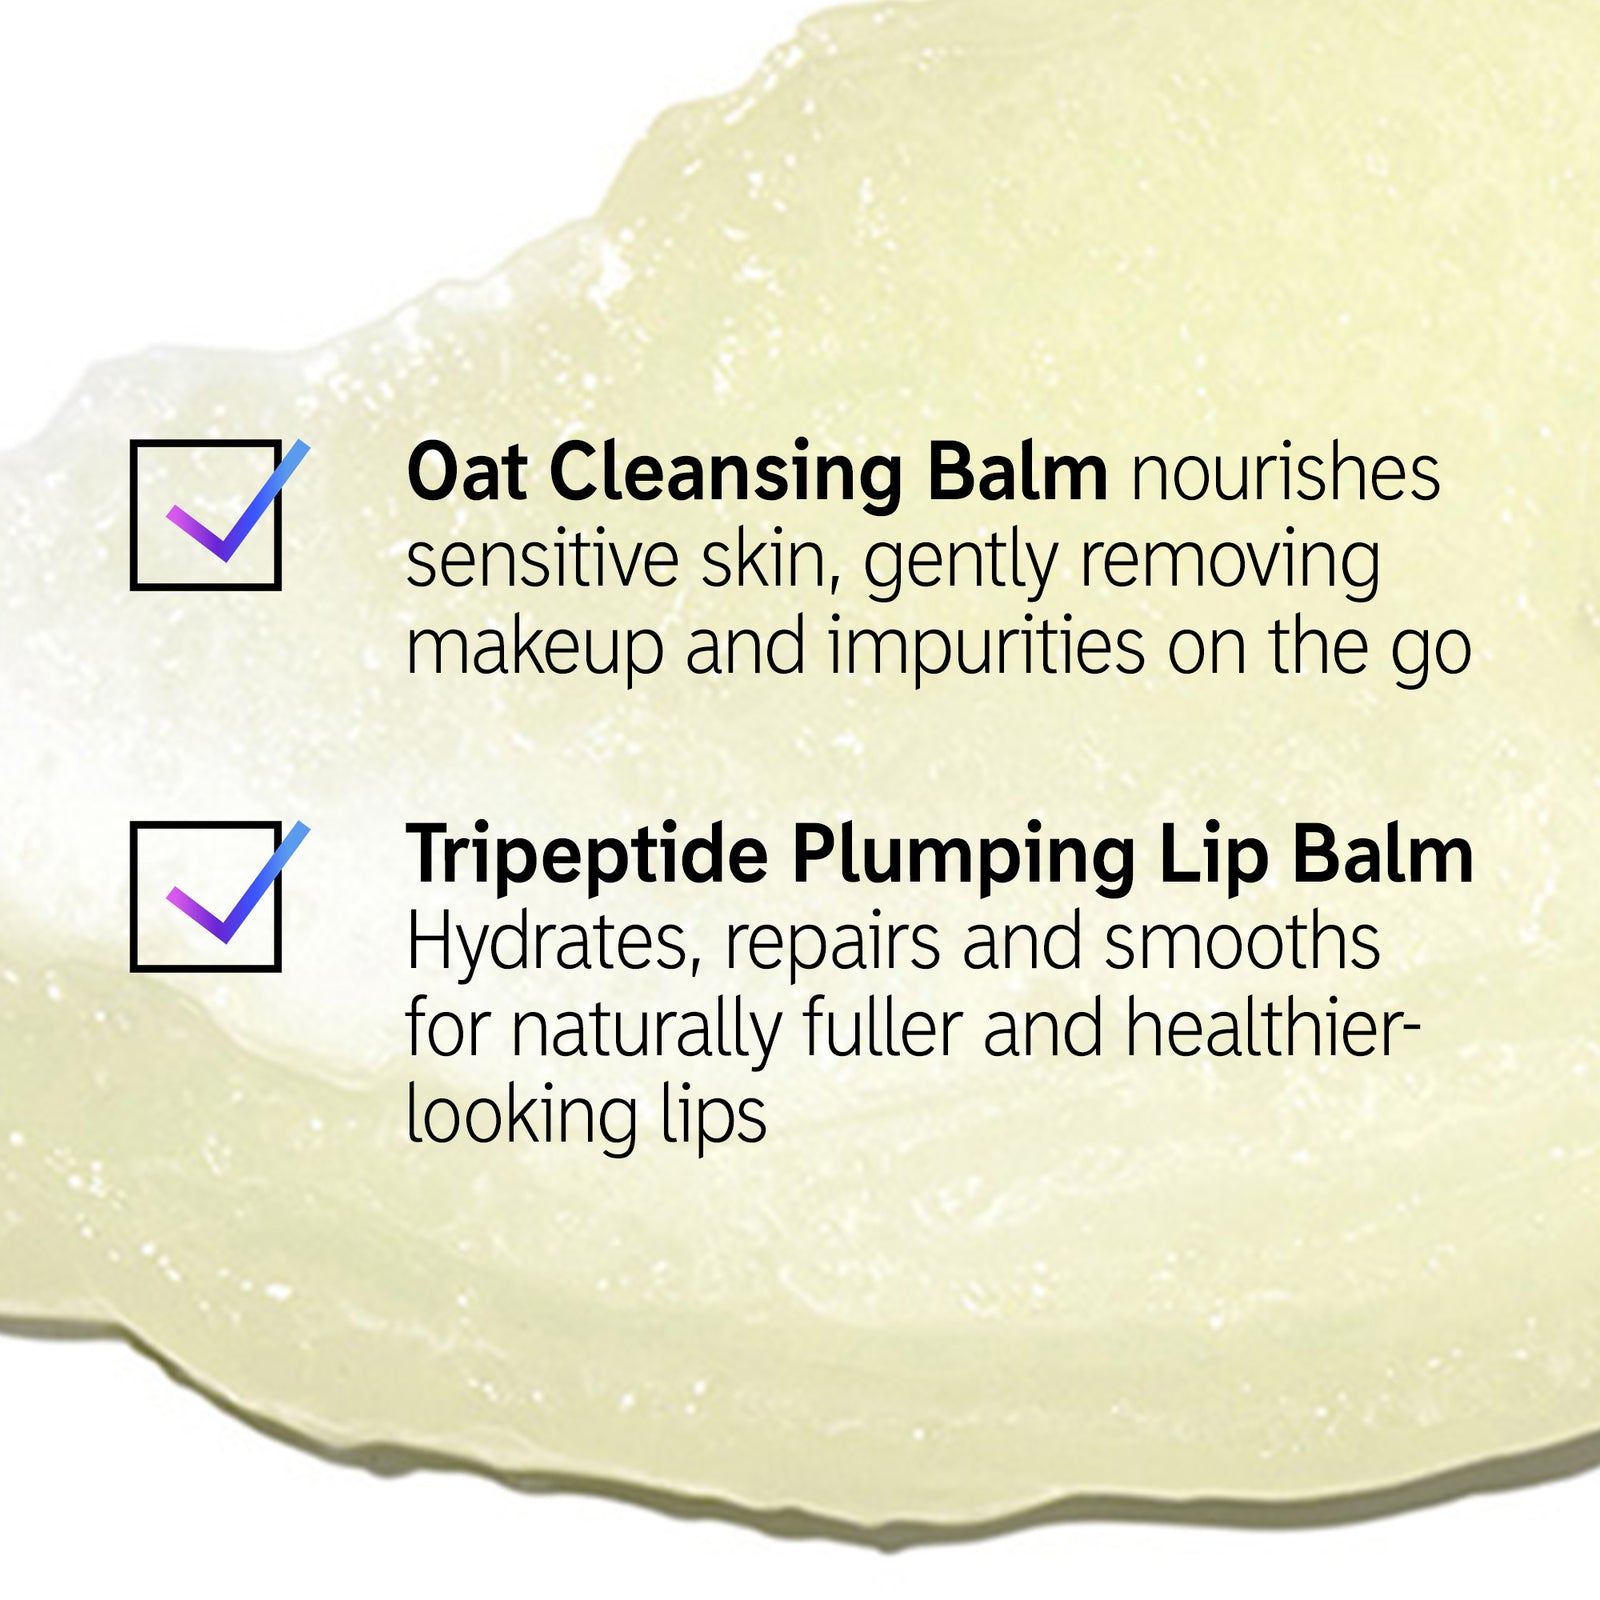 Goop shot with text overlay that reads 'Oat Cleansing Balm nourishes sensitivr skin, gently removing makeup and impurities on the go, Tripeptide Plumping Lip Balm hydrates, repairs and smooths for naturally fuller and healthier looking lips'